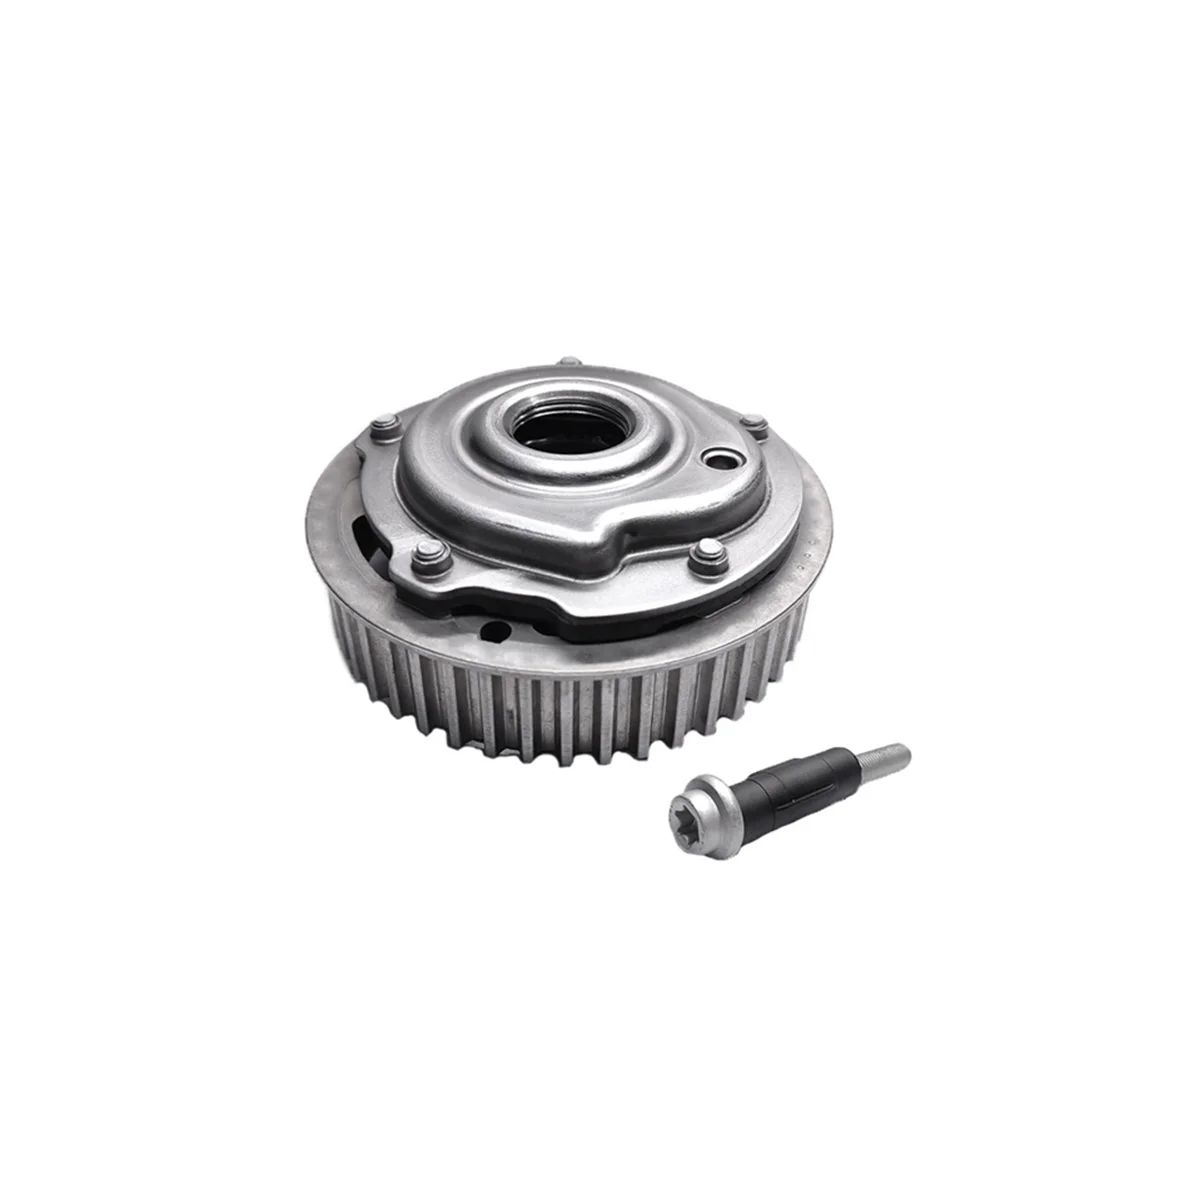 

55568386 Engine Timing Intake Camshaft Adjuster Cam Gear for Chevrolet Aveo Cruze Sonic